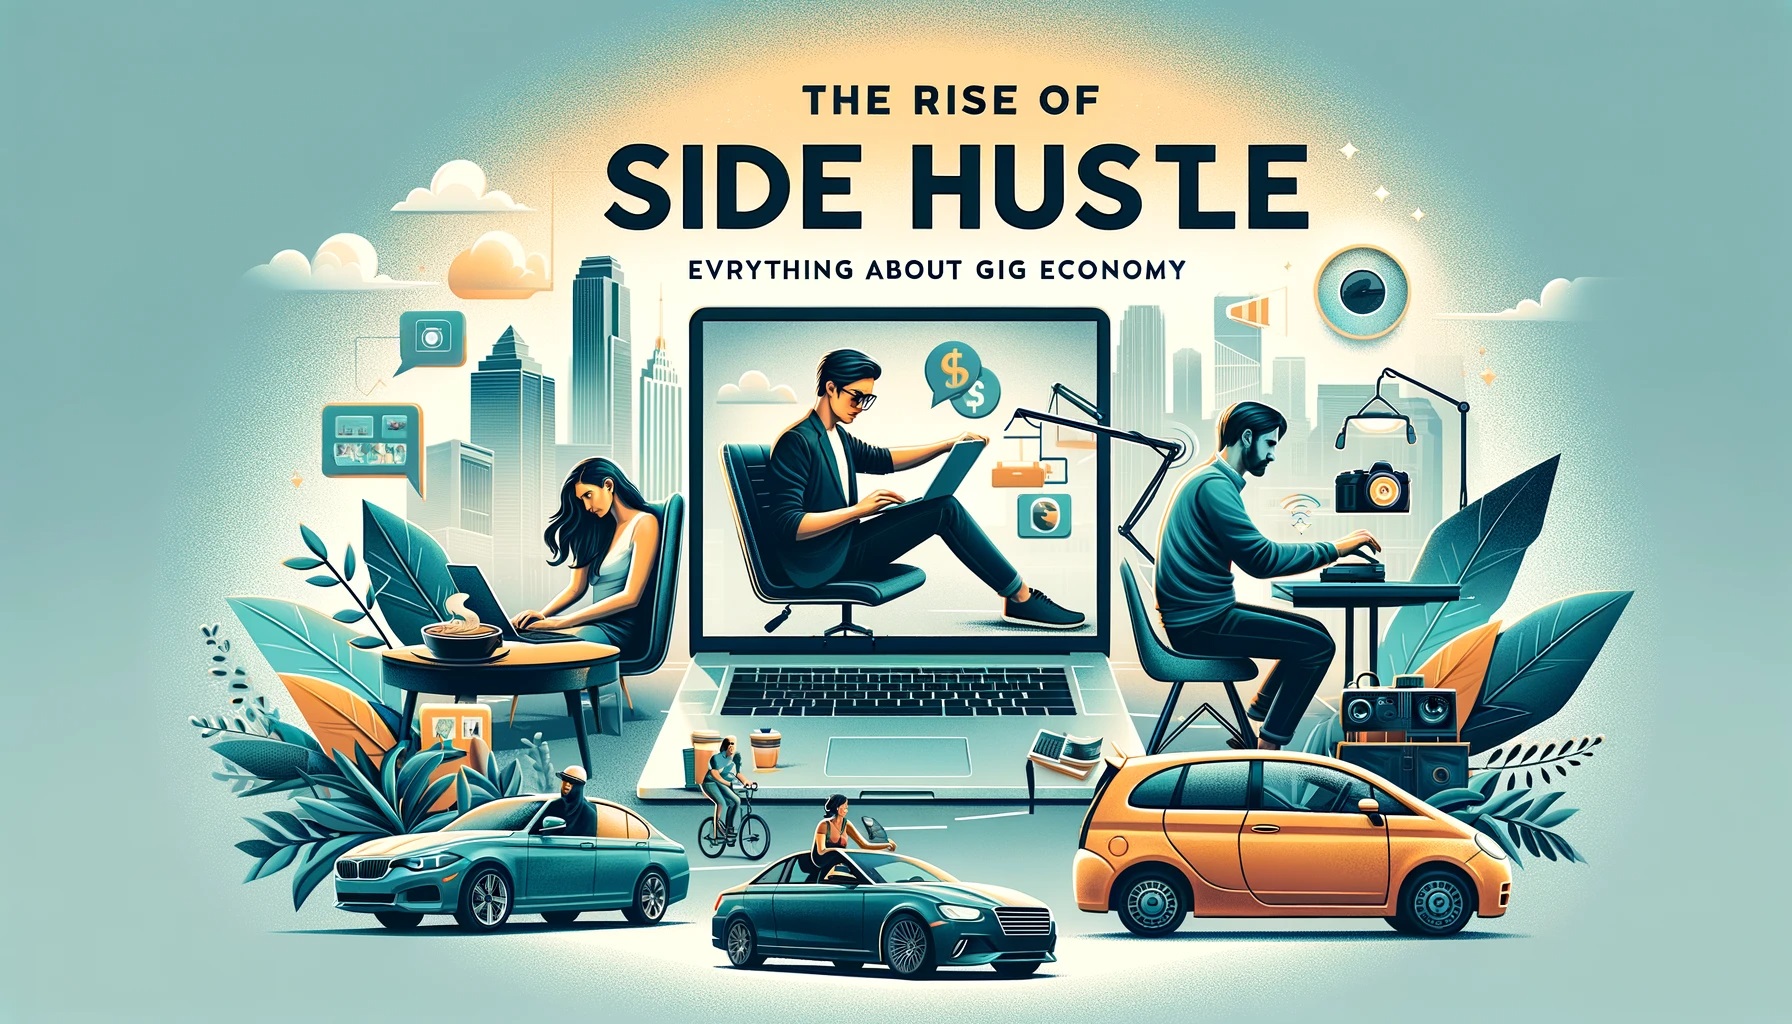 The Rise Of Side Hustle - Everything About Gig Economy